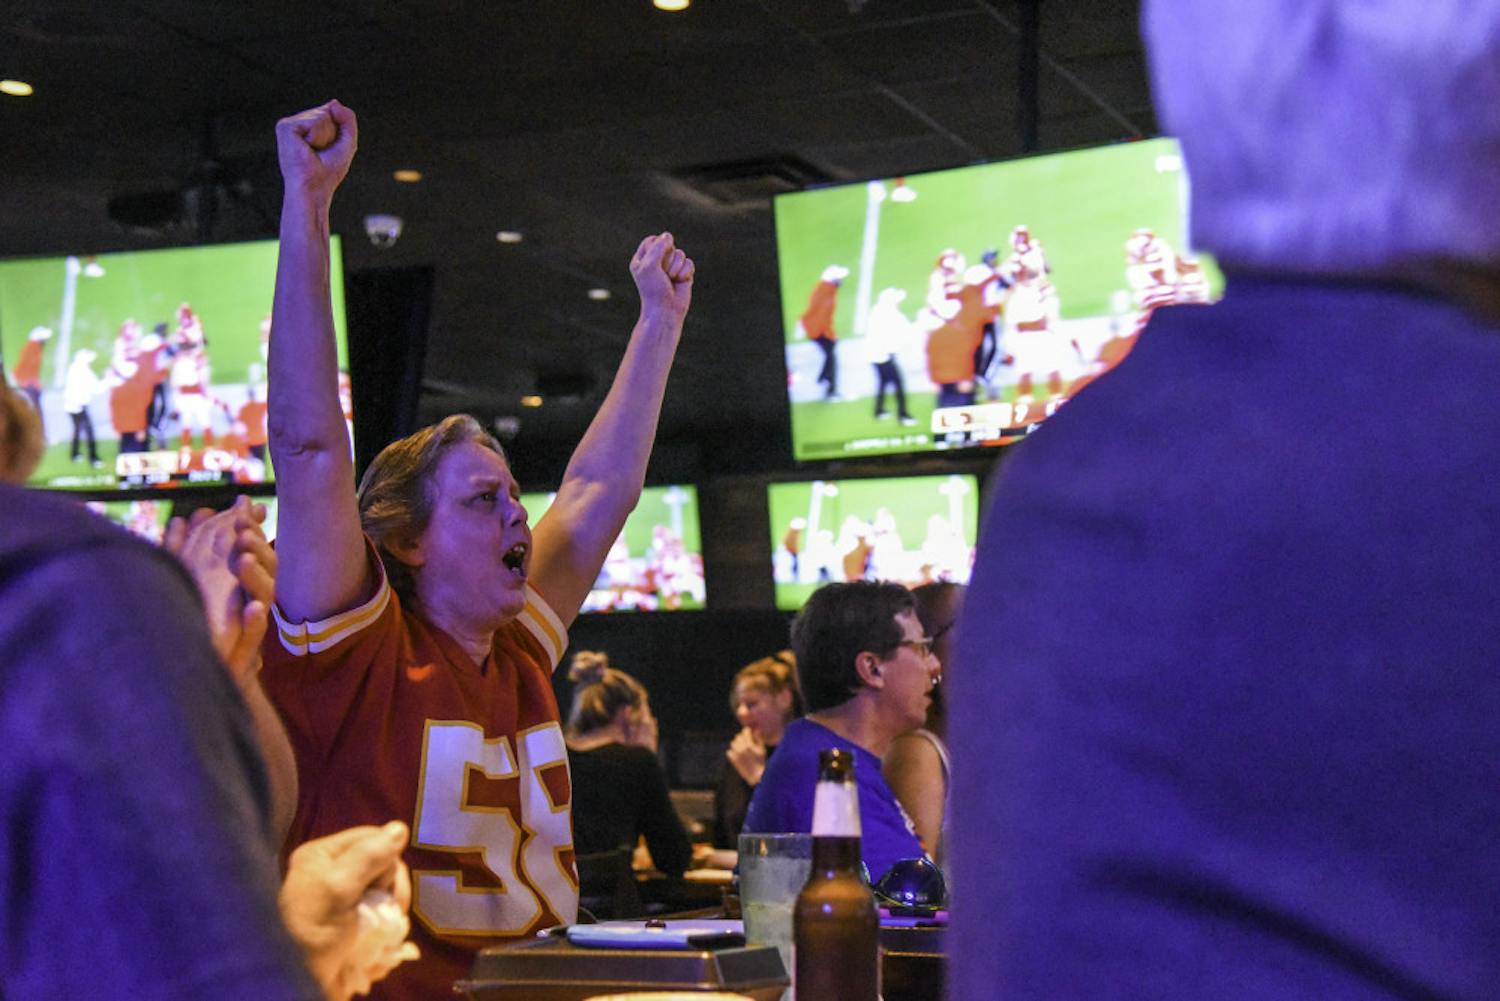 Football fans gather at the Miller's Ale House on 2881 Bass Pro Shops Blvd to watch the 2020 Super Bowl game Sunday evening. 